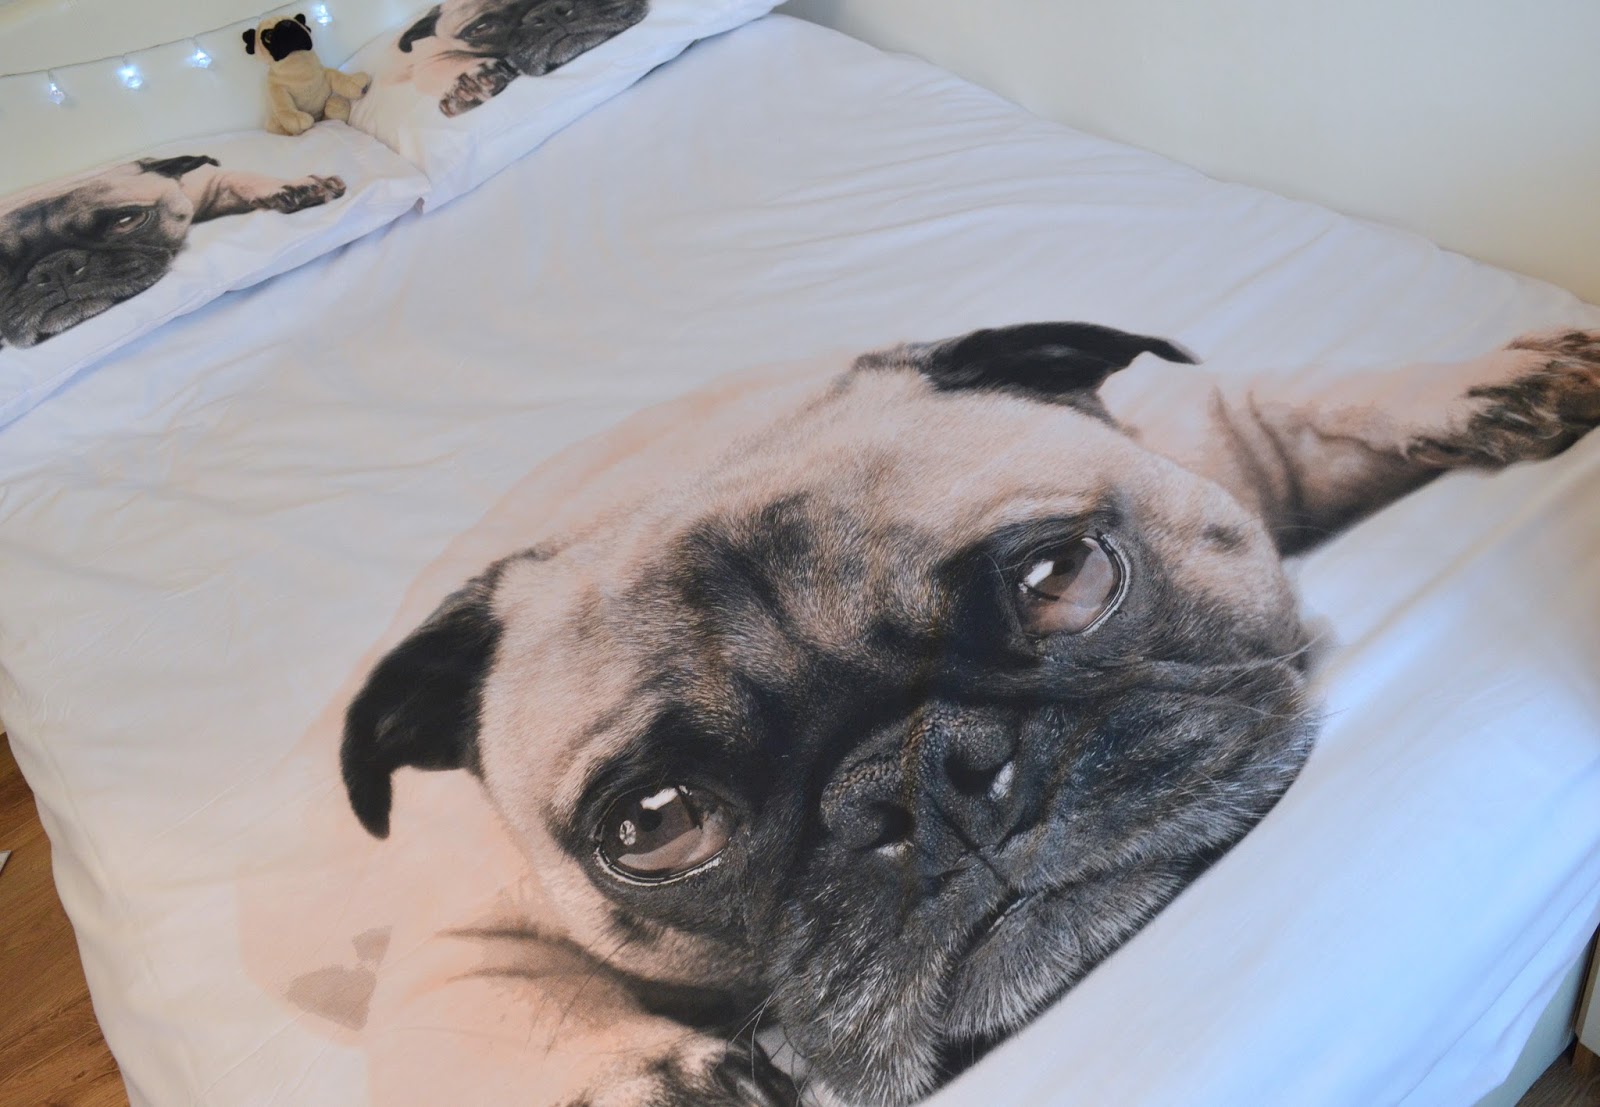 A Part of Bedroom Decoration: The funniest bed sheet covers ever